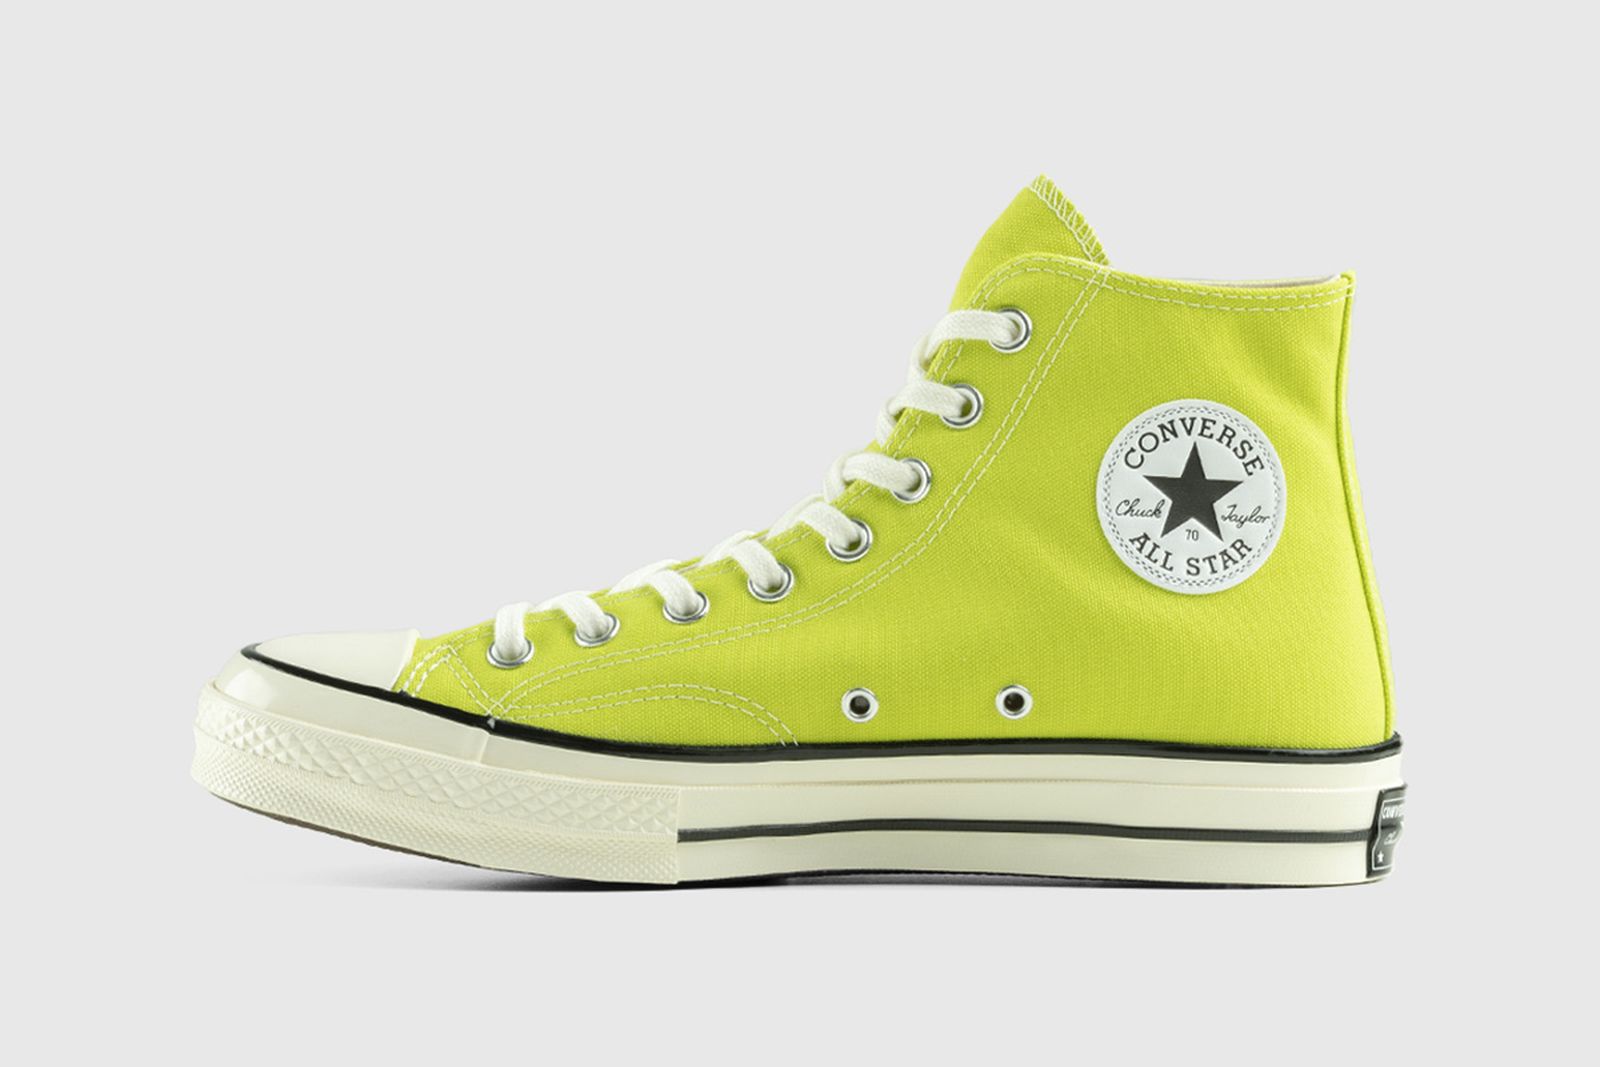 Converse Chuck Taylor All Star Lime Green: Official Images & Info